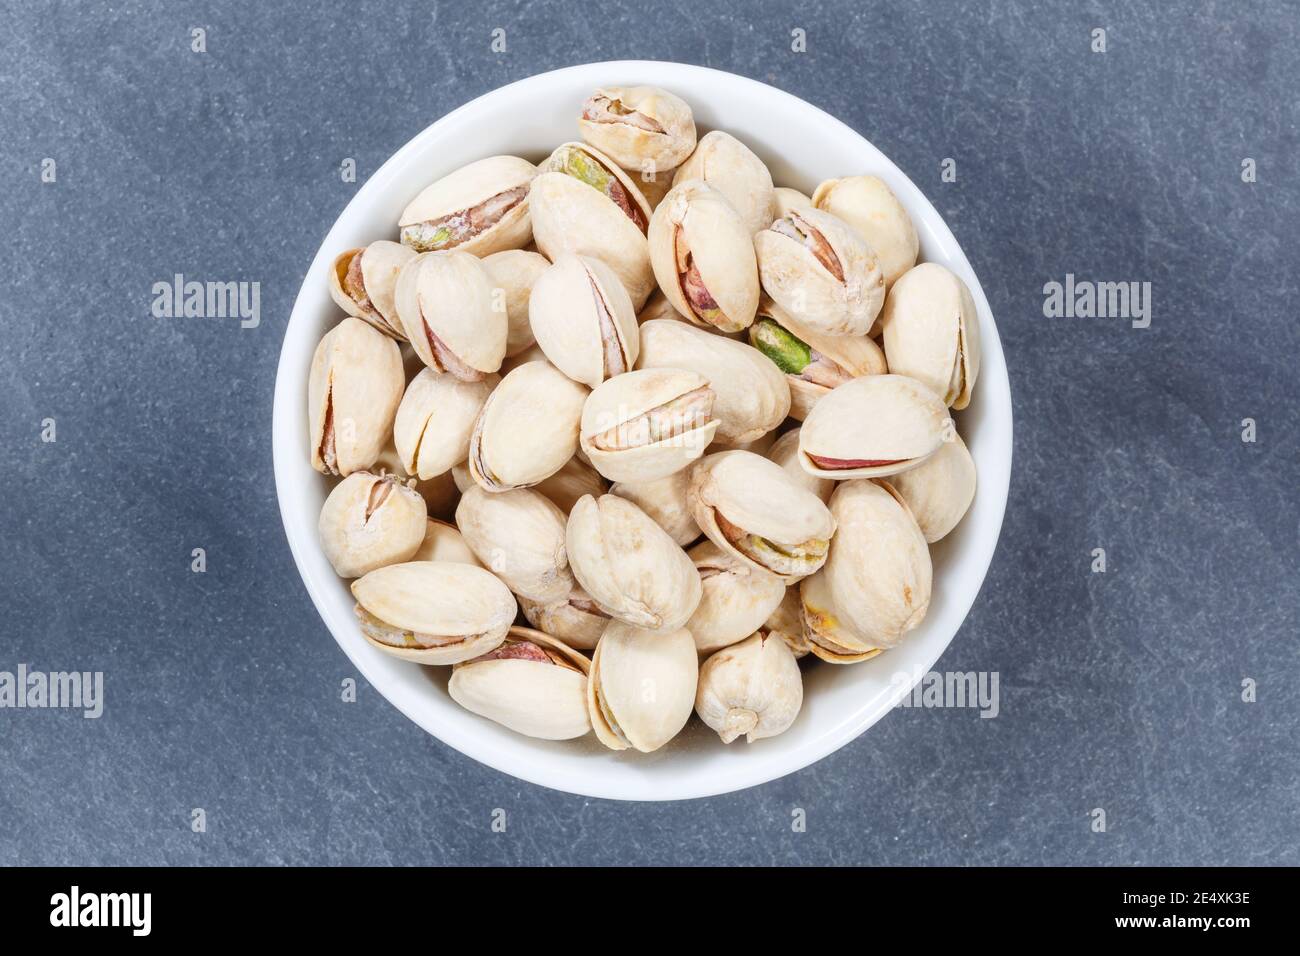 Pistachios pistachio nuts from above bowl on a slate Stock Photo